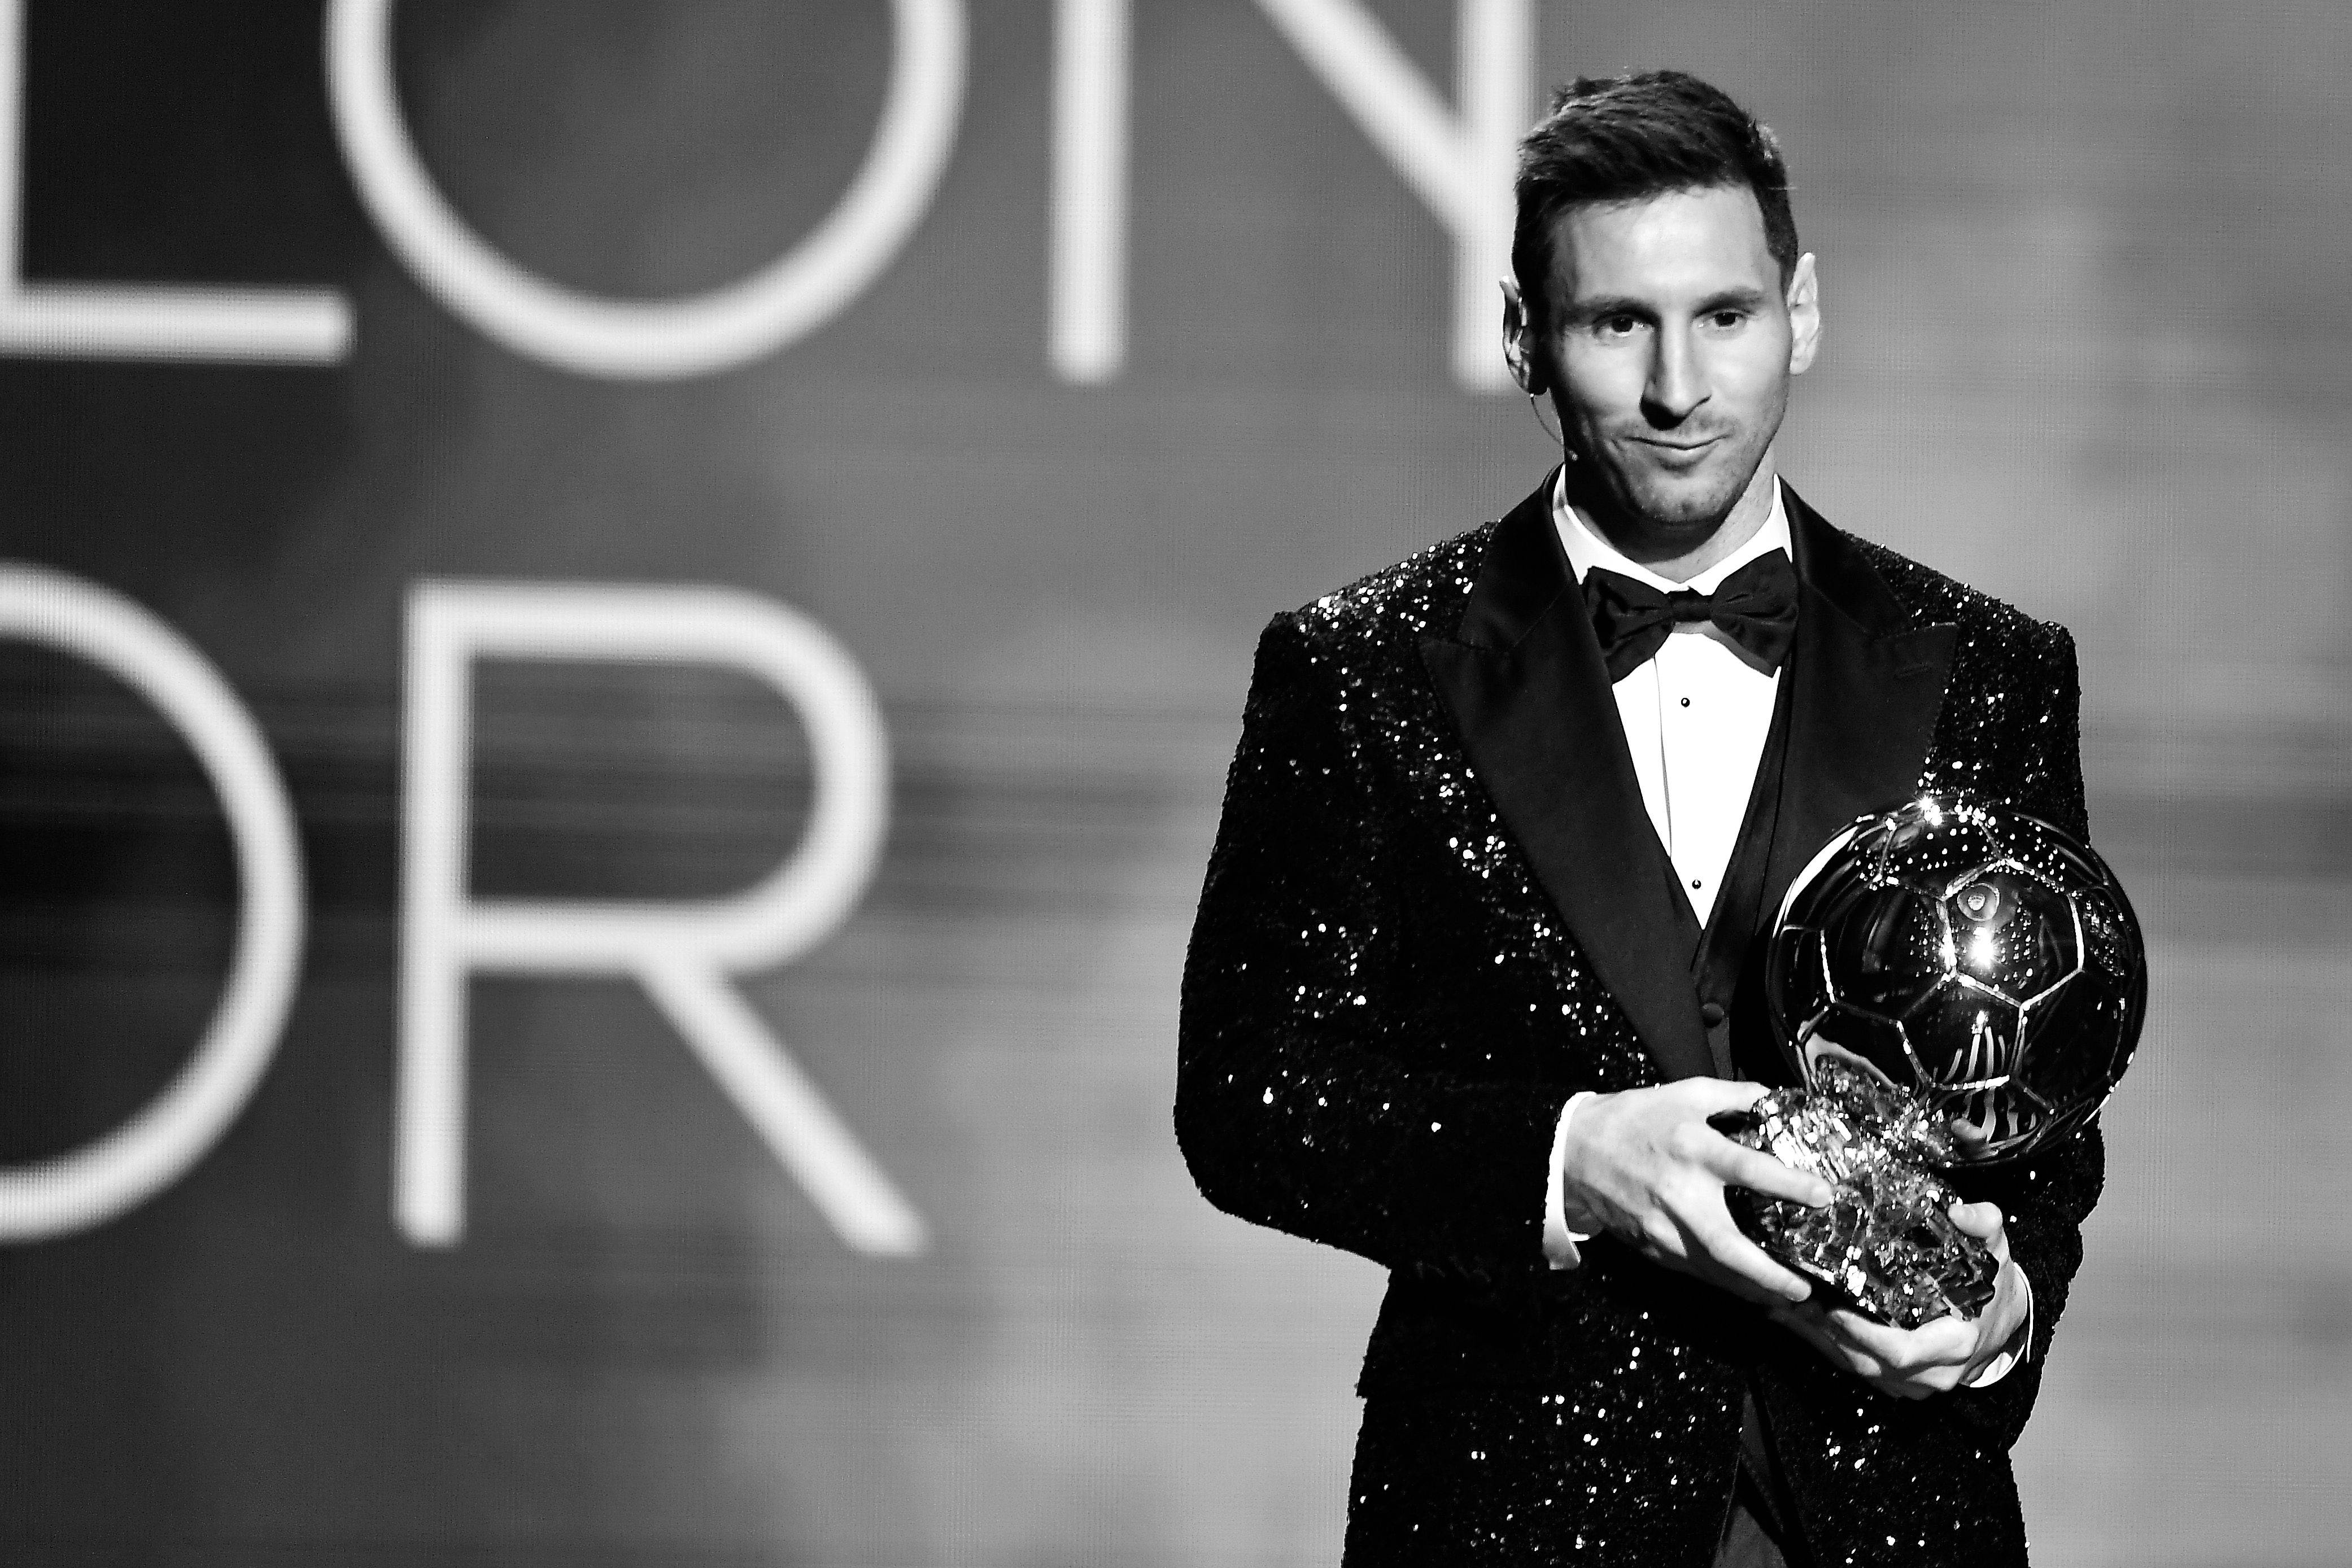 Lionel Messi with the Ballon d'Or